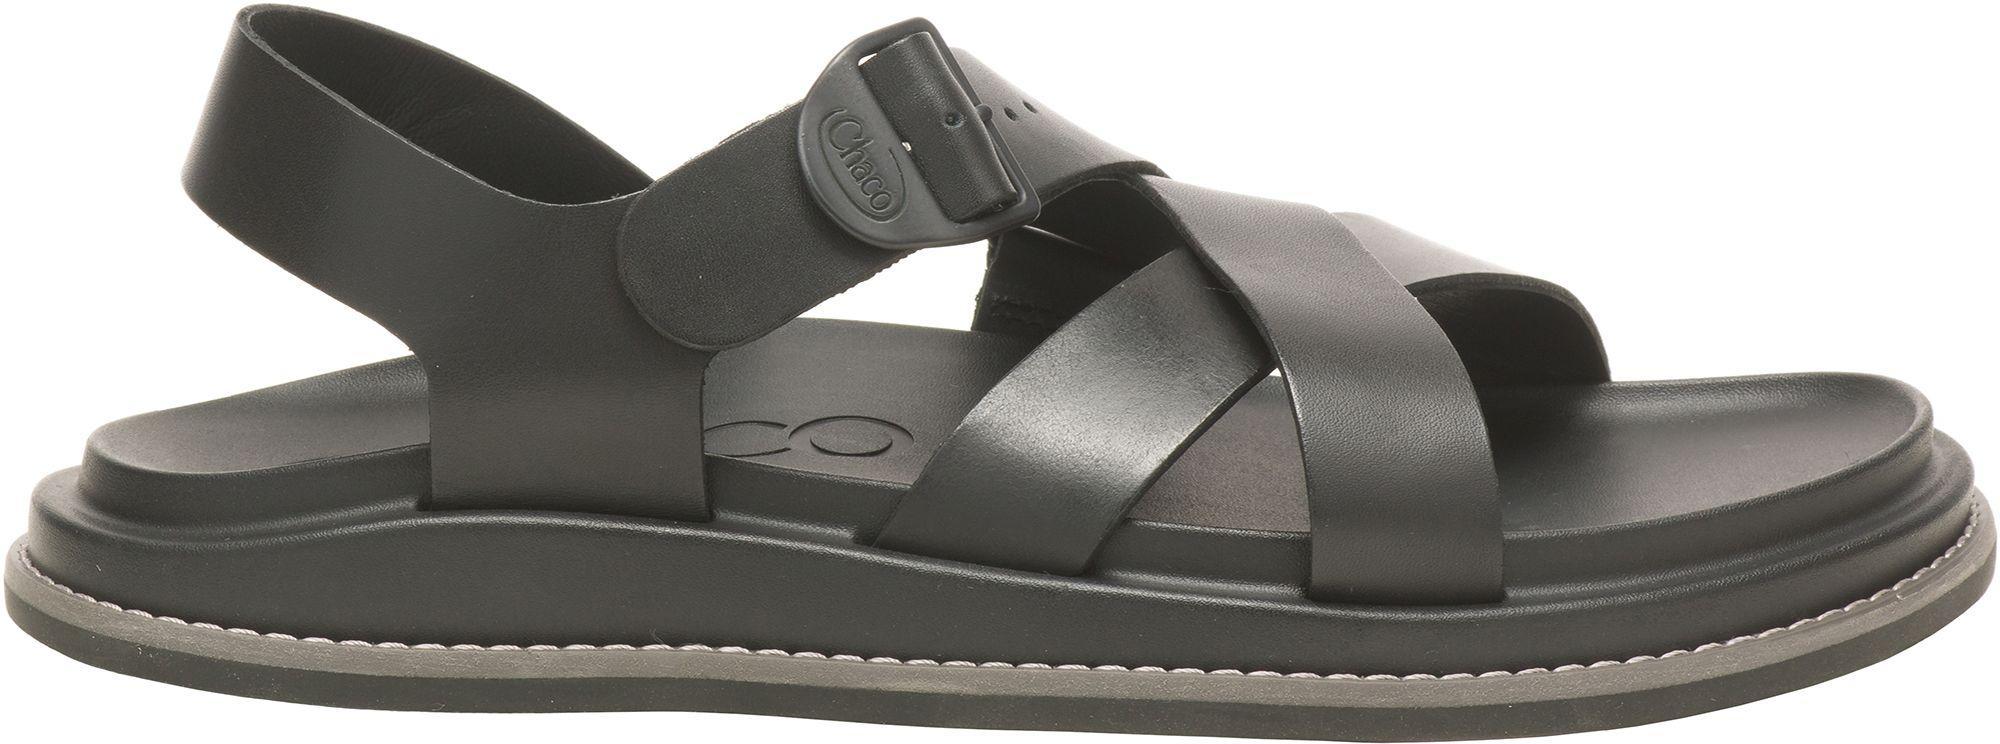 Chaco Townes Sandal Product Image